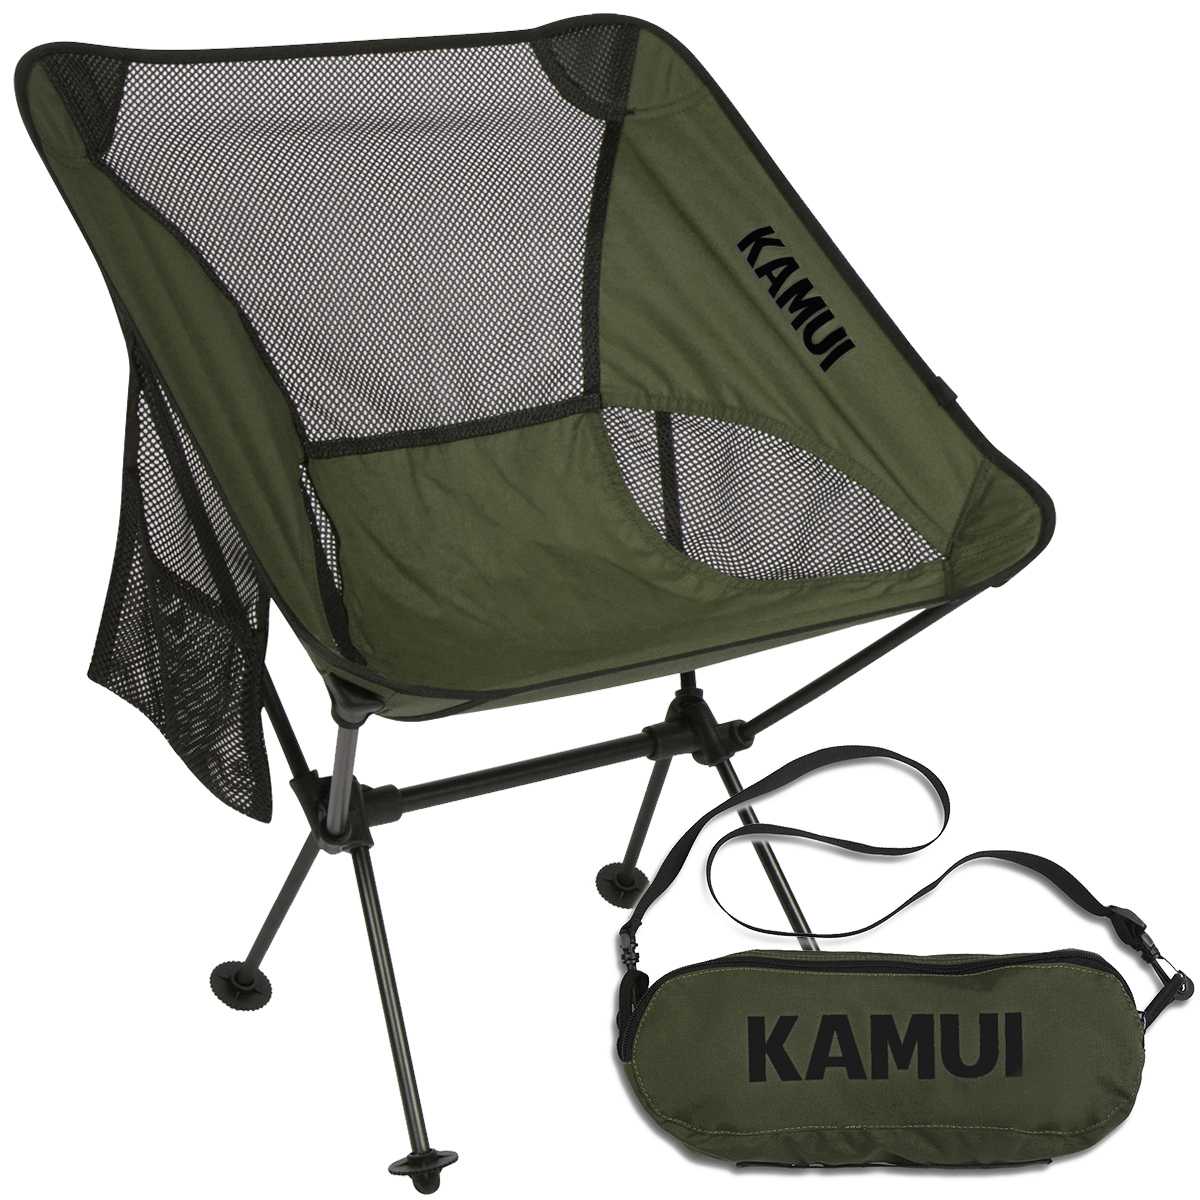 Compact Lightweight Folding With Side Pocket Larg Kamui Portable Camping Chair 